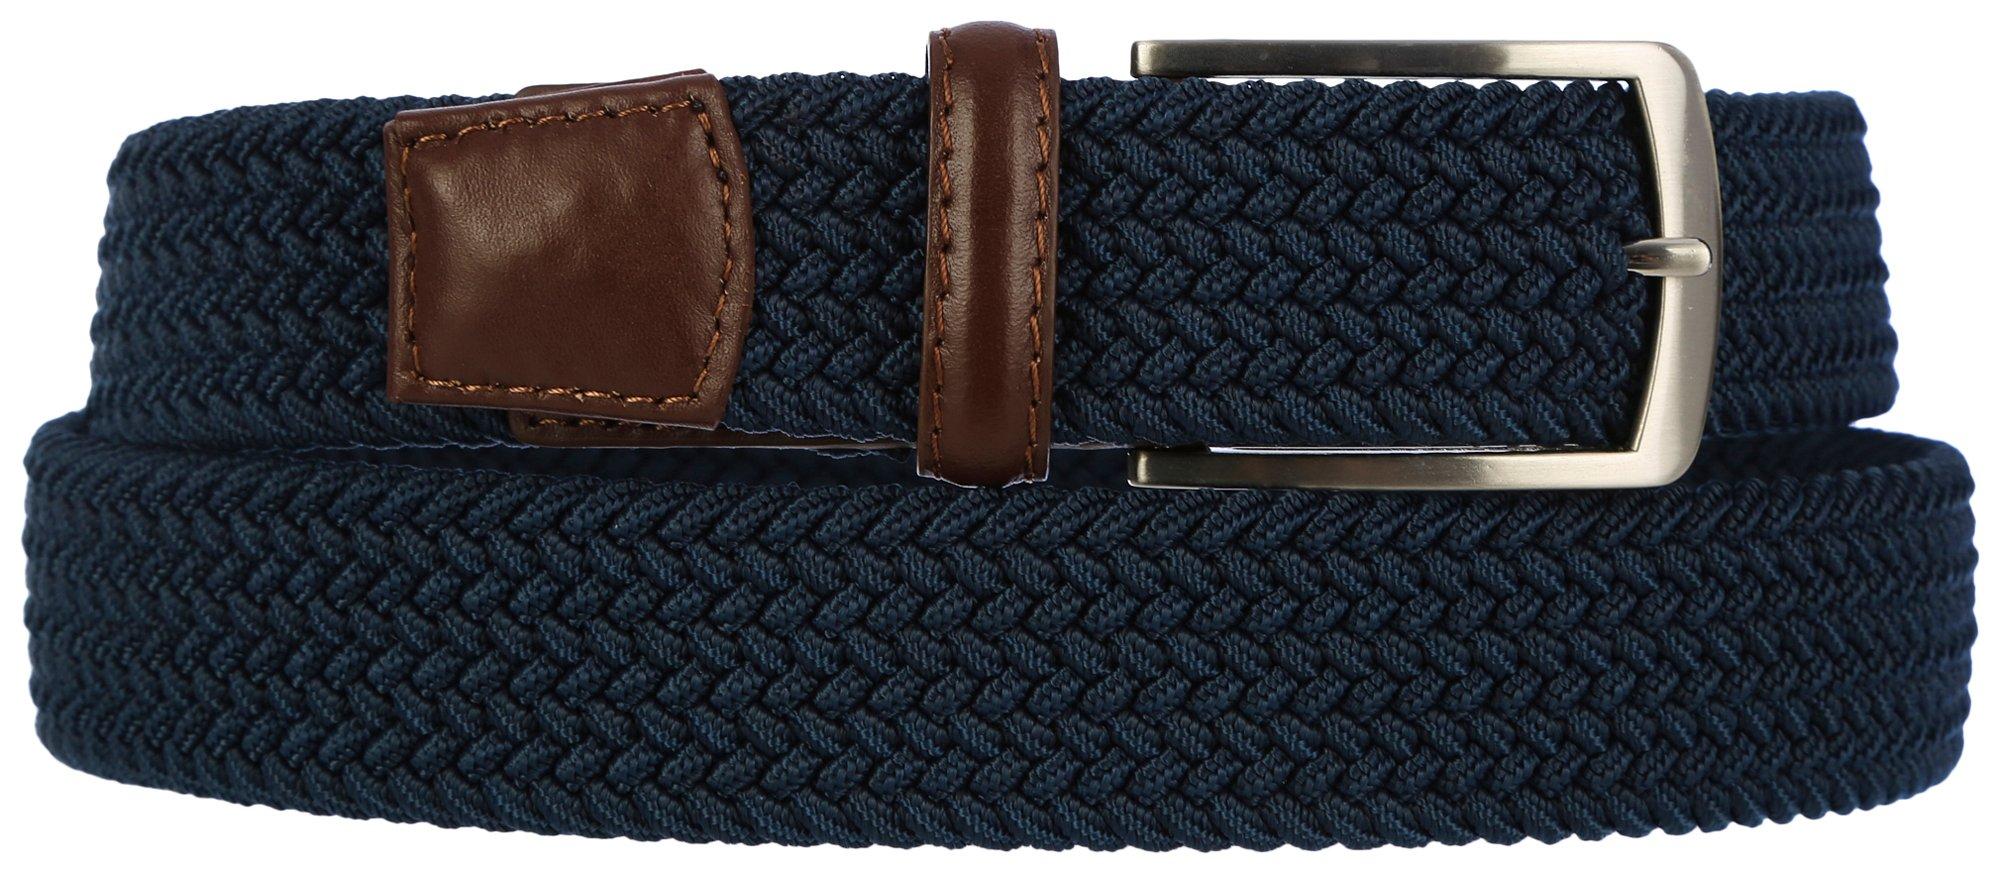 Dockers Mens 33 MM Stretch Woven Casual Belt